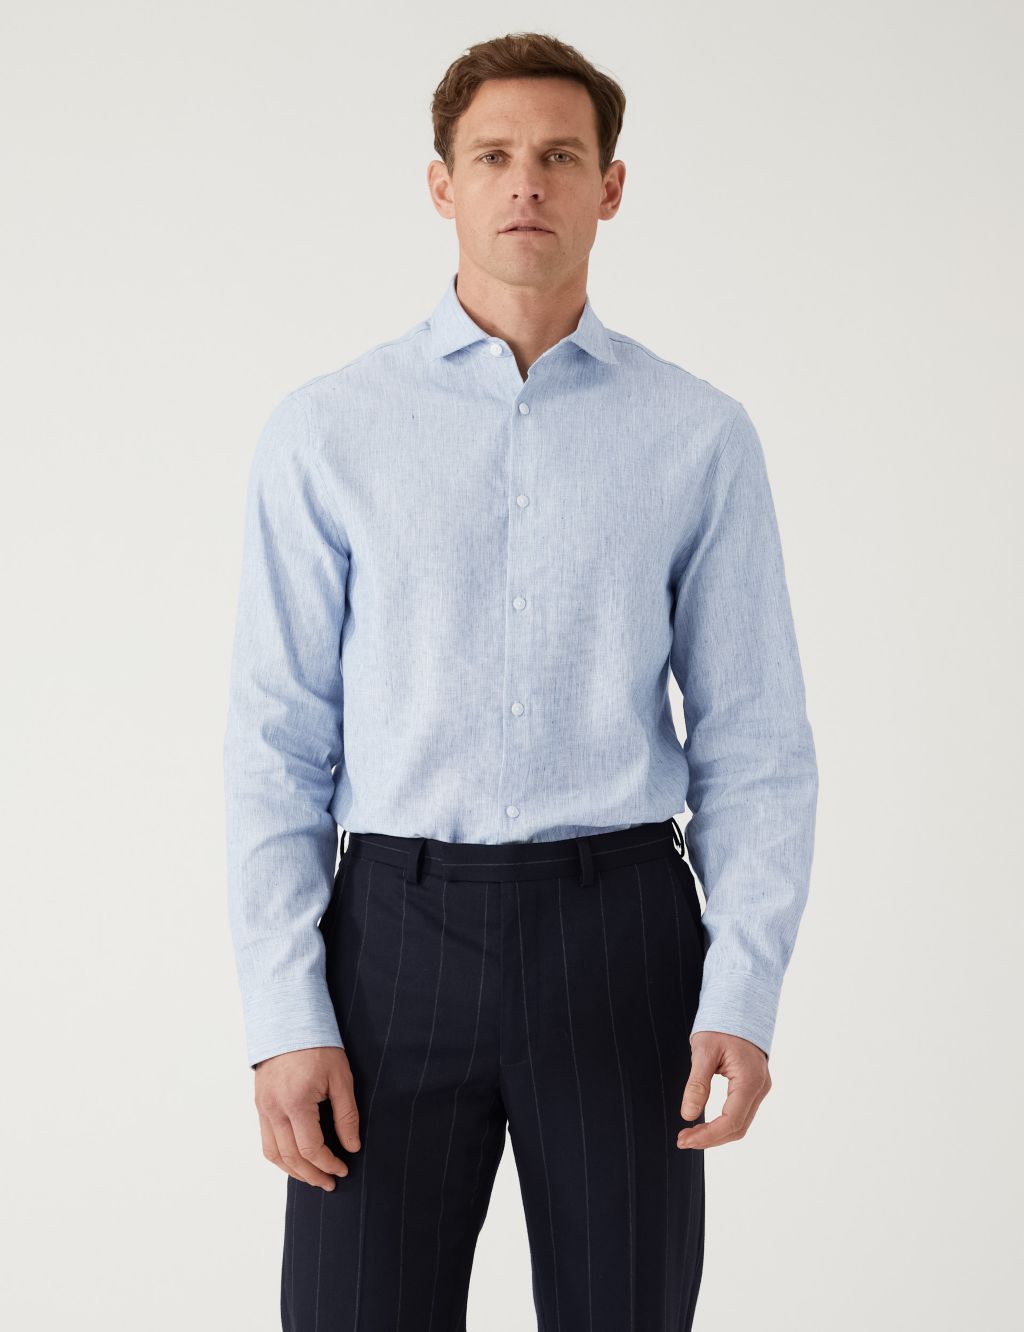 Tailored Fit Italian Linen Miracle™ Shirt image 1